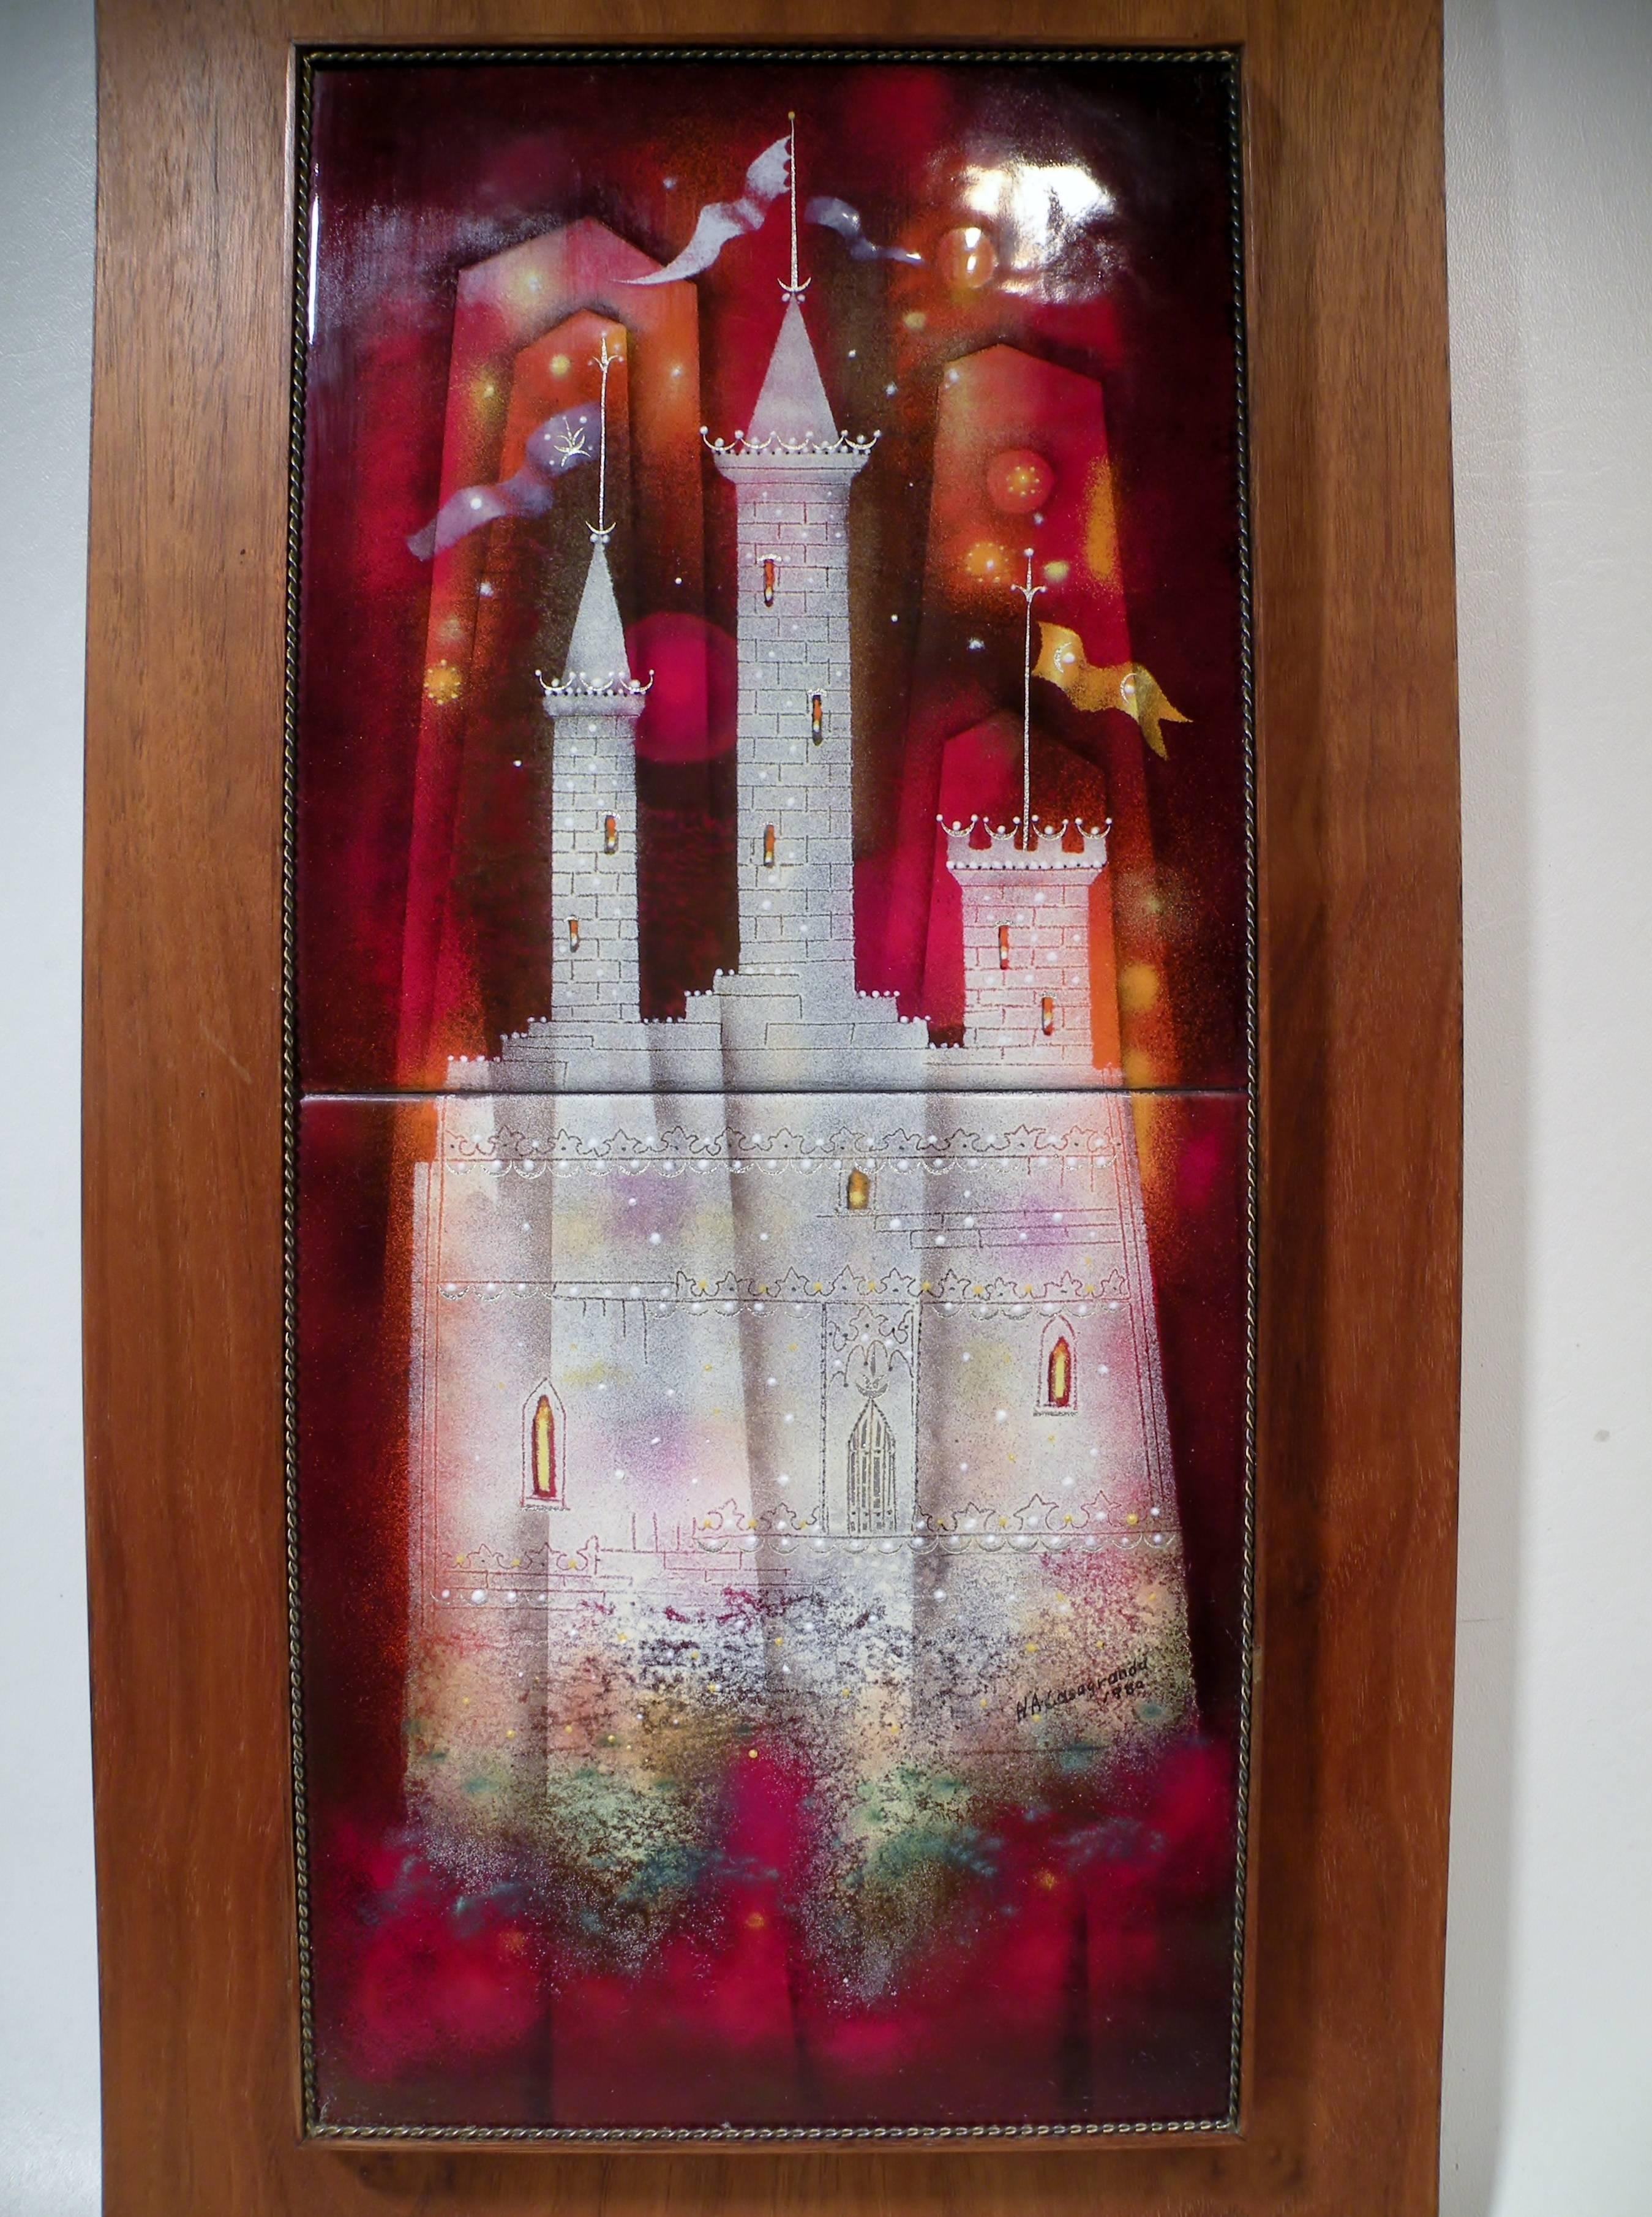 Herman Casagranda (1917-2011) Colorado, Medieval Castle, enamel on copper with walnut frame back.  Image: 7.25" x 16", outside frame dimensions 11" x 20.5".

Renowned for decorating his Frisco home in a medieval style along with